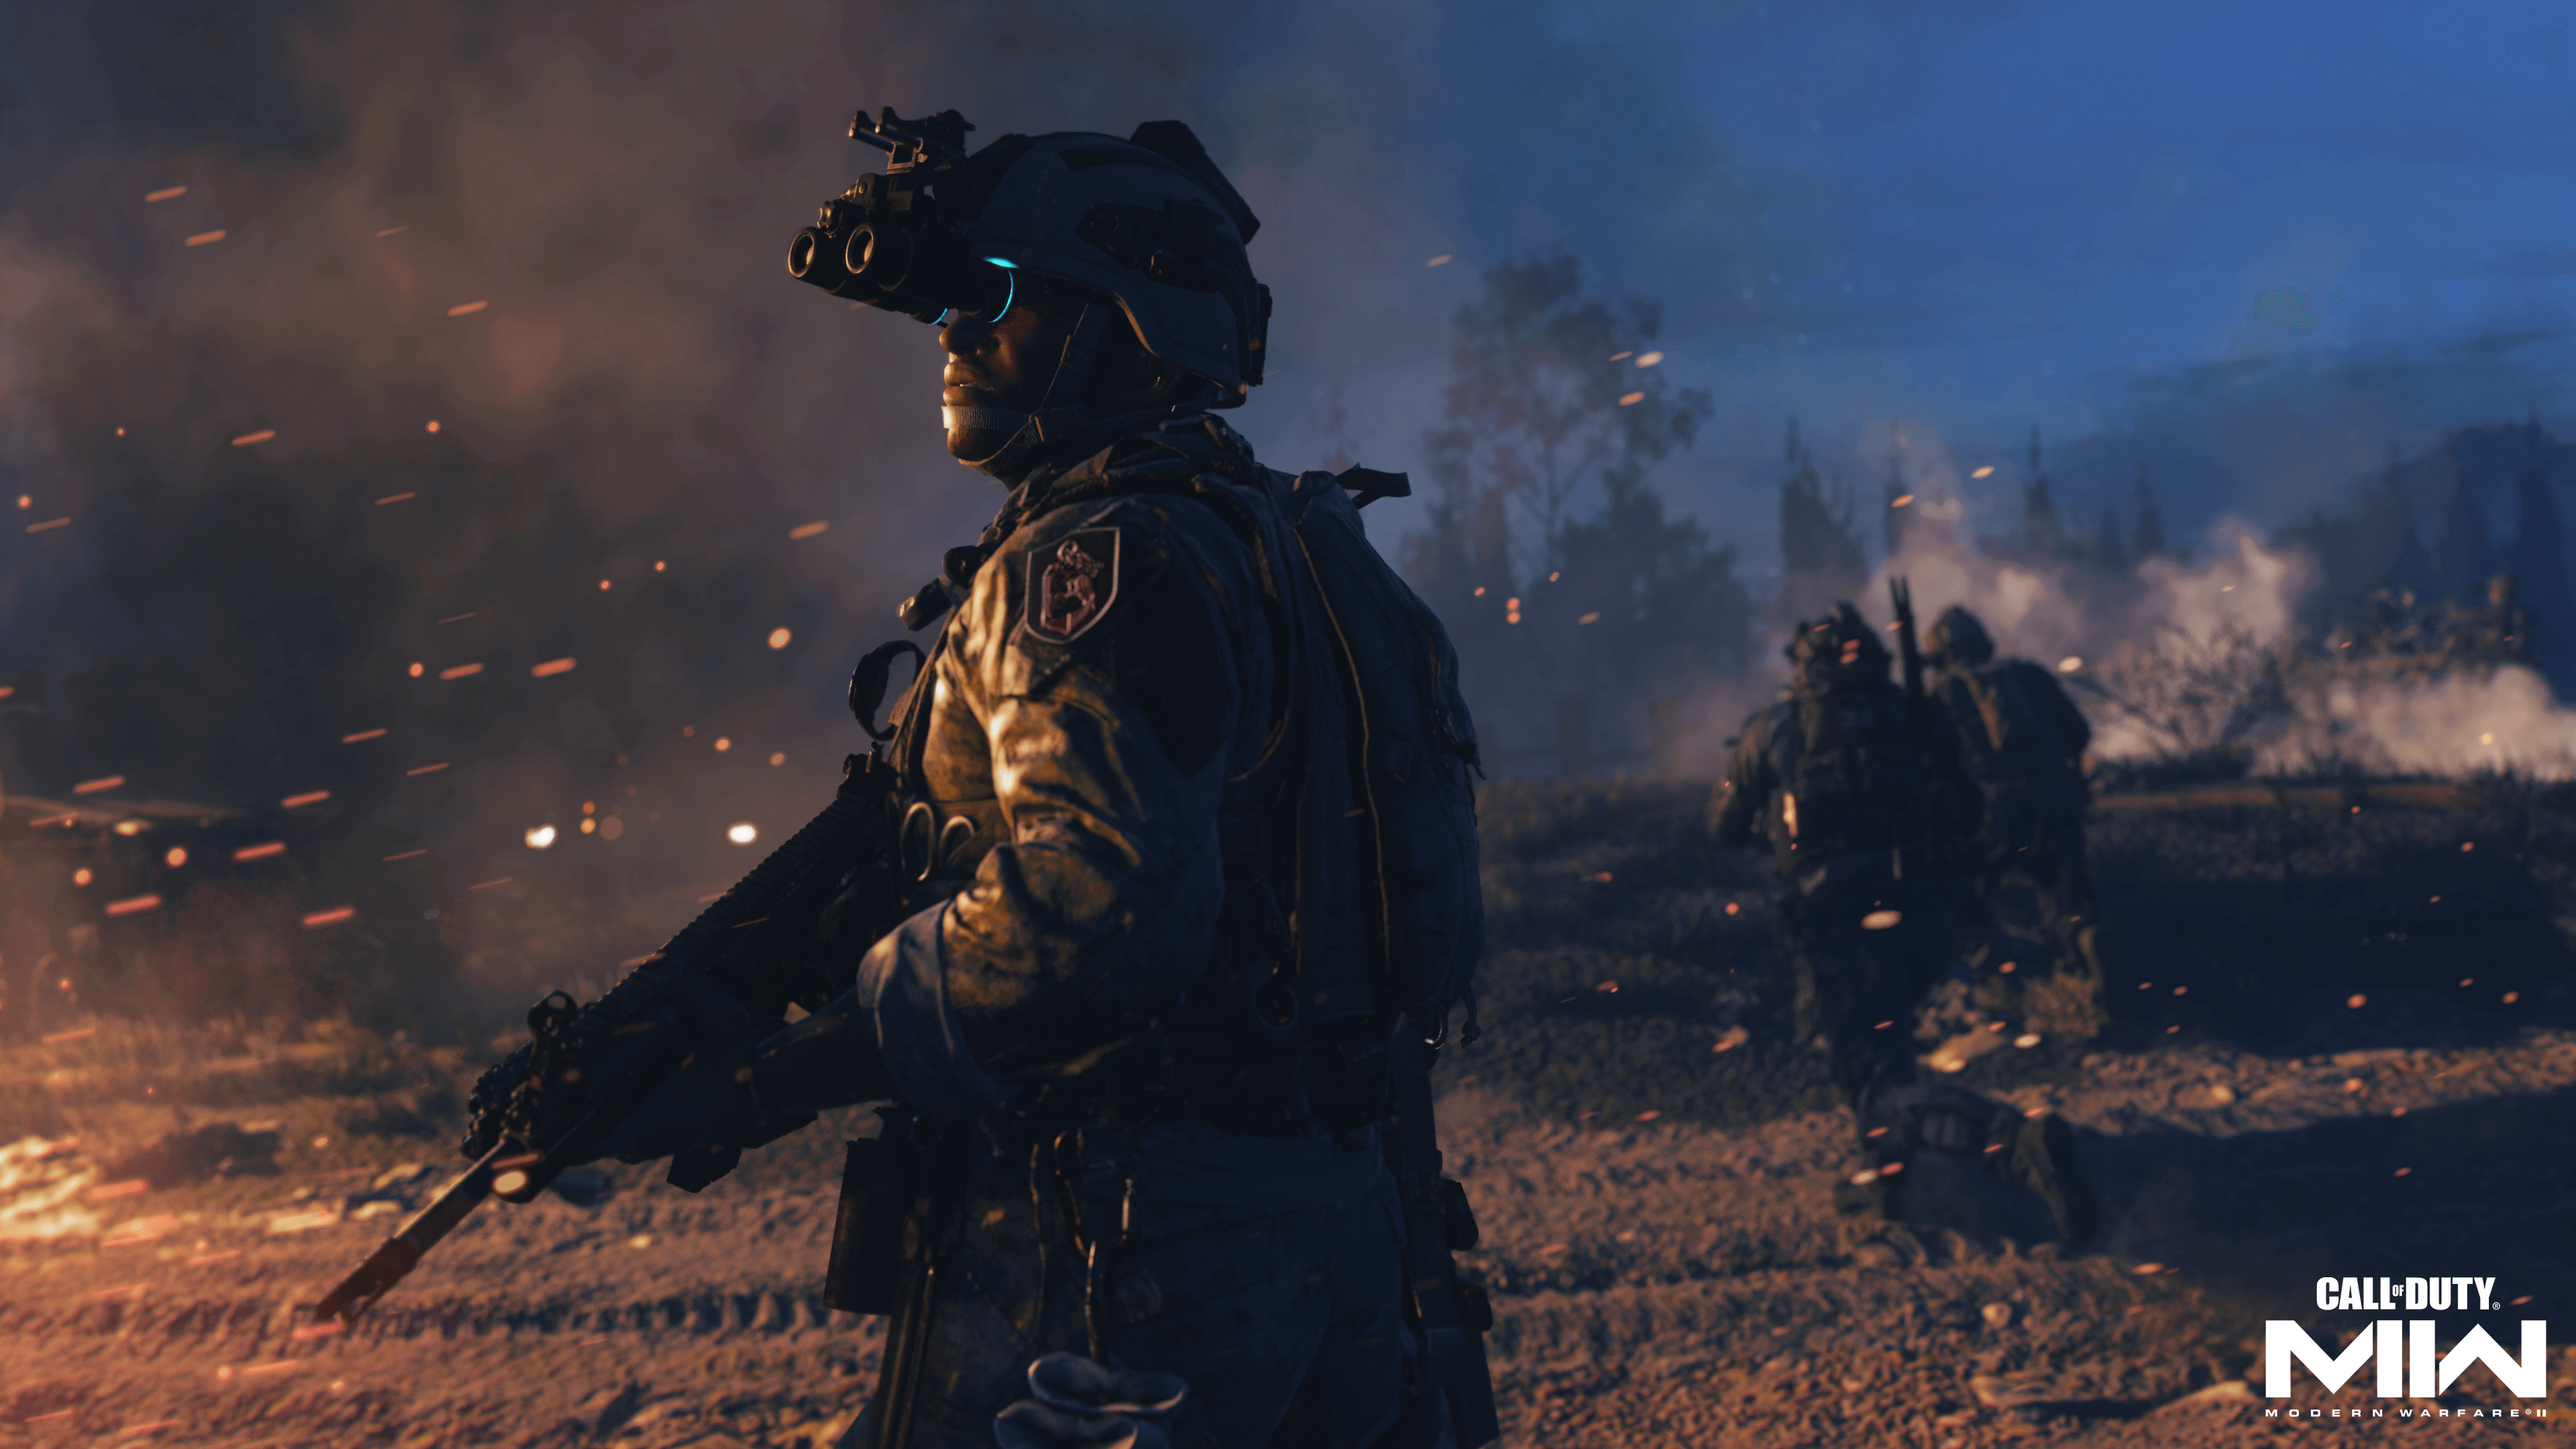 ‘Call of Duty: Modern Warfare II’ continues the franchise’s long history of courting controversy